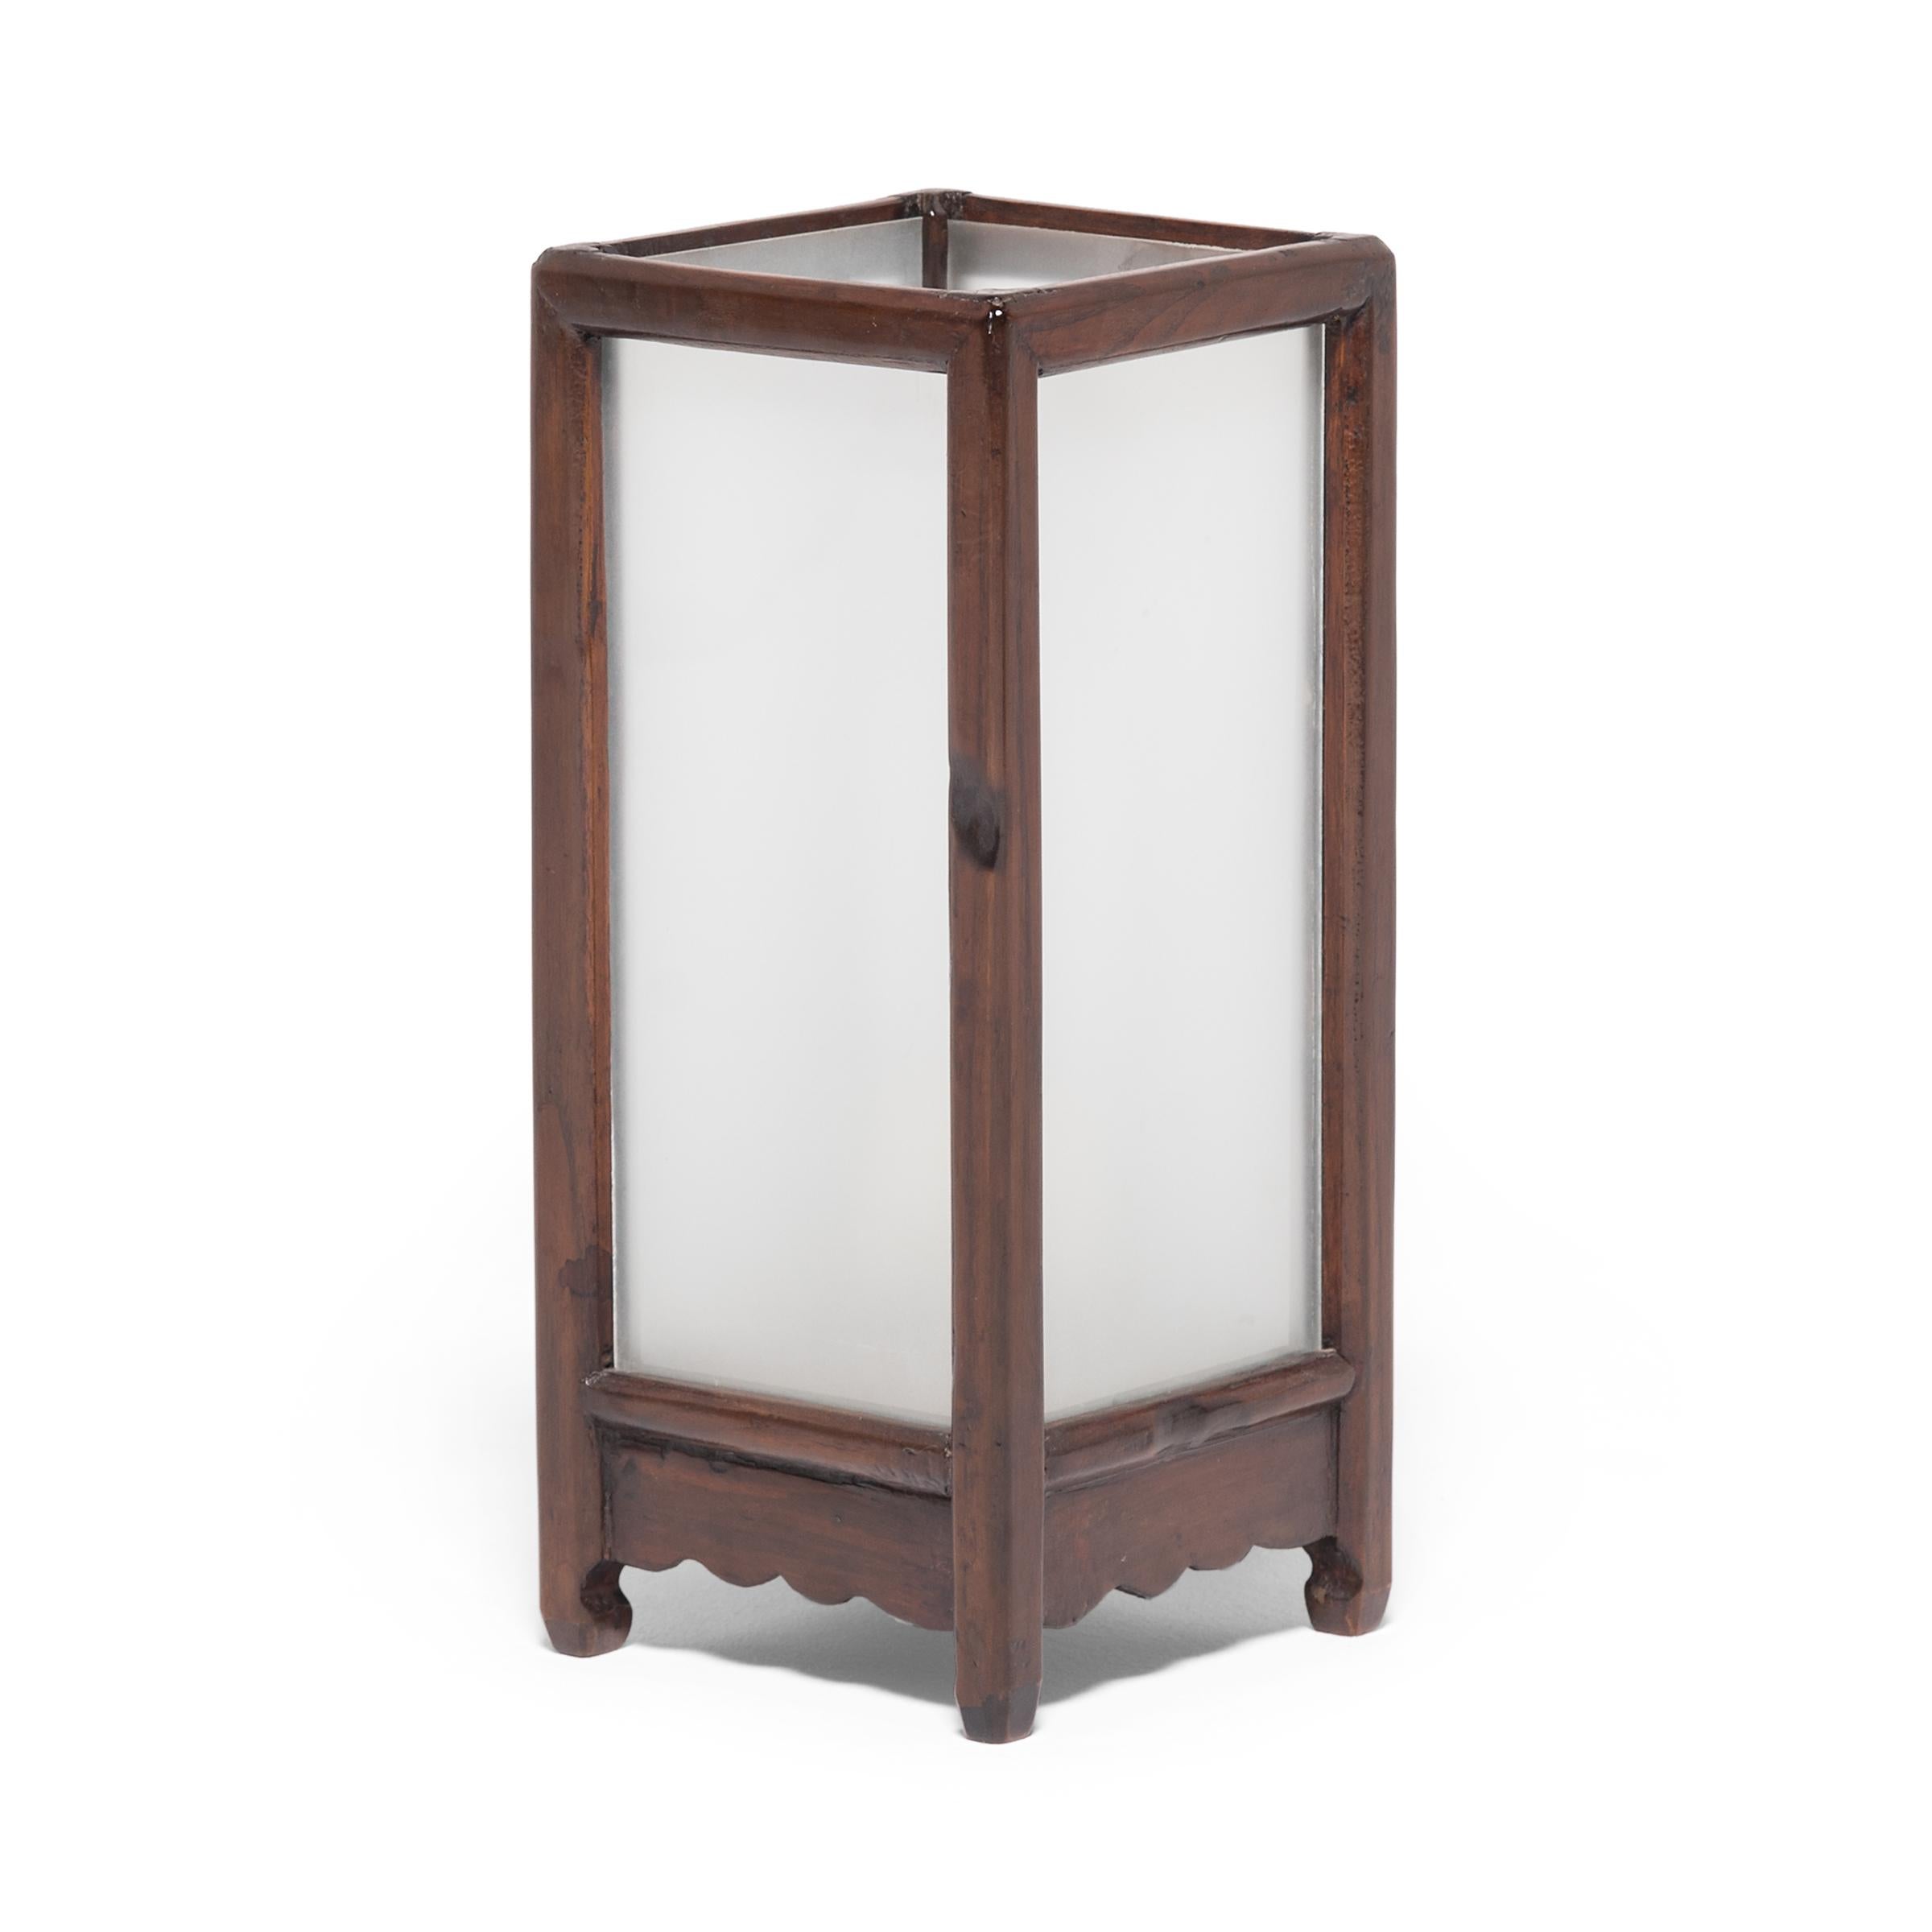 Framed in hand carved rosewood, this 19th century tabletop lantern casts a soft glow through frosted glass. Exemplifying the simplicity found in Chinese furniture of the same era, this lantern illuminates modern interiors with a refined form that